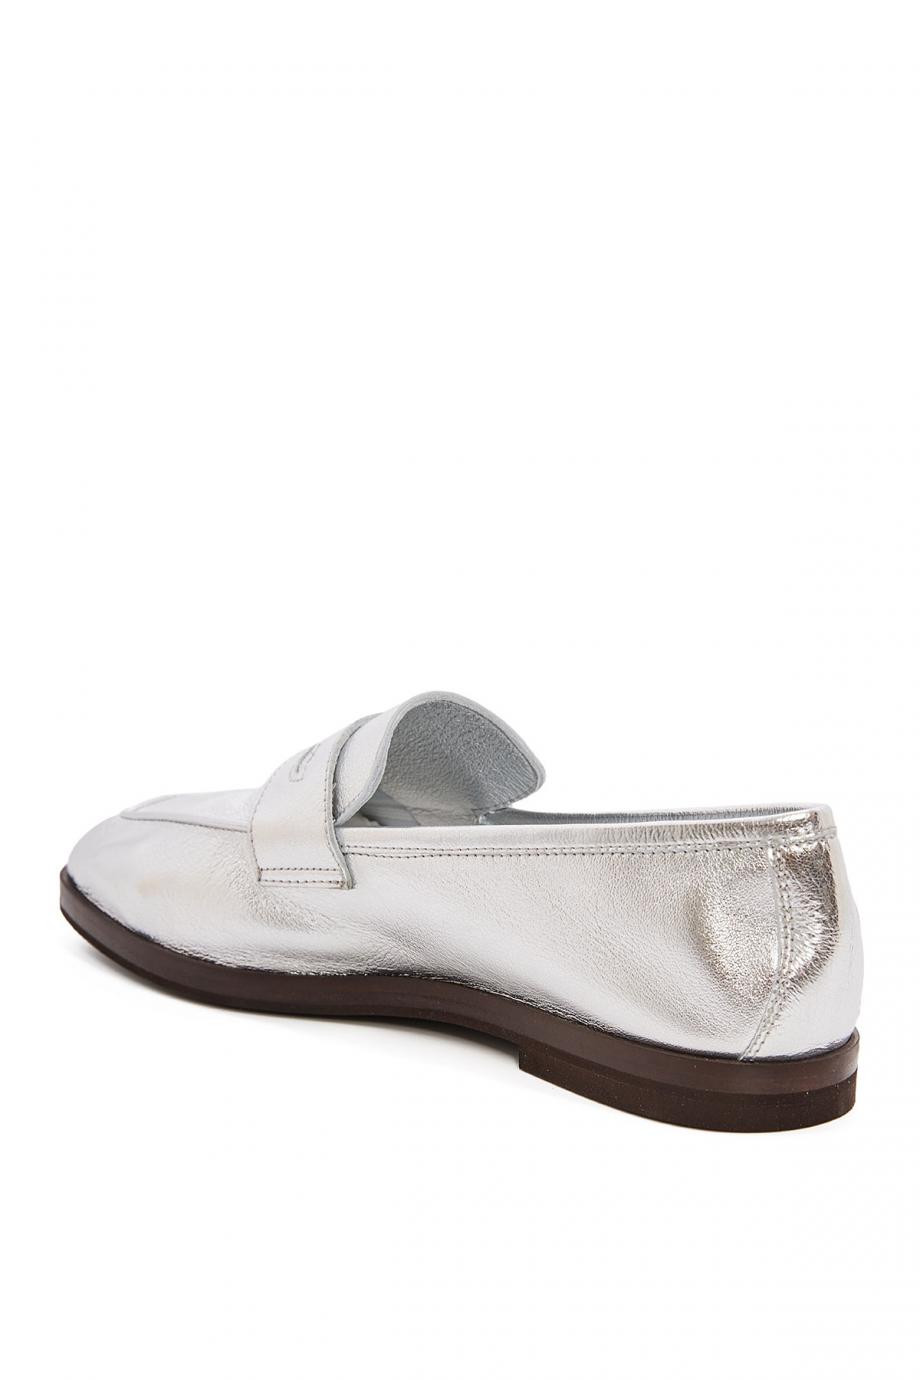 Chalet Donna metallic leather loafers